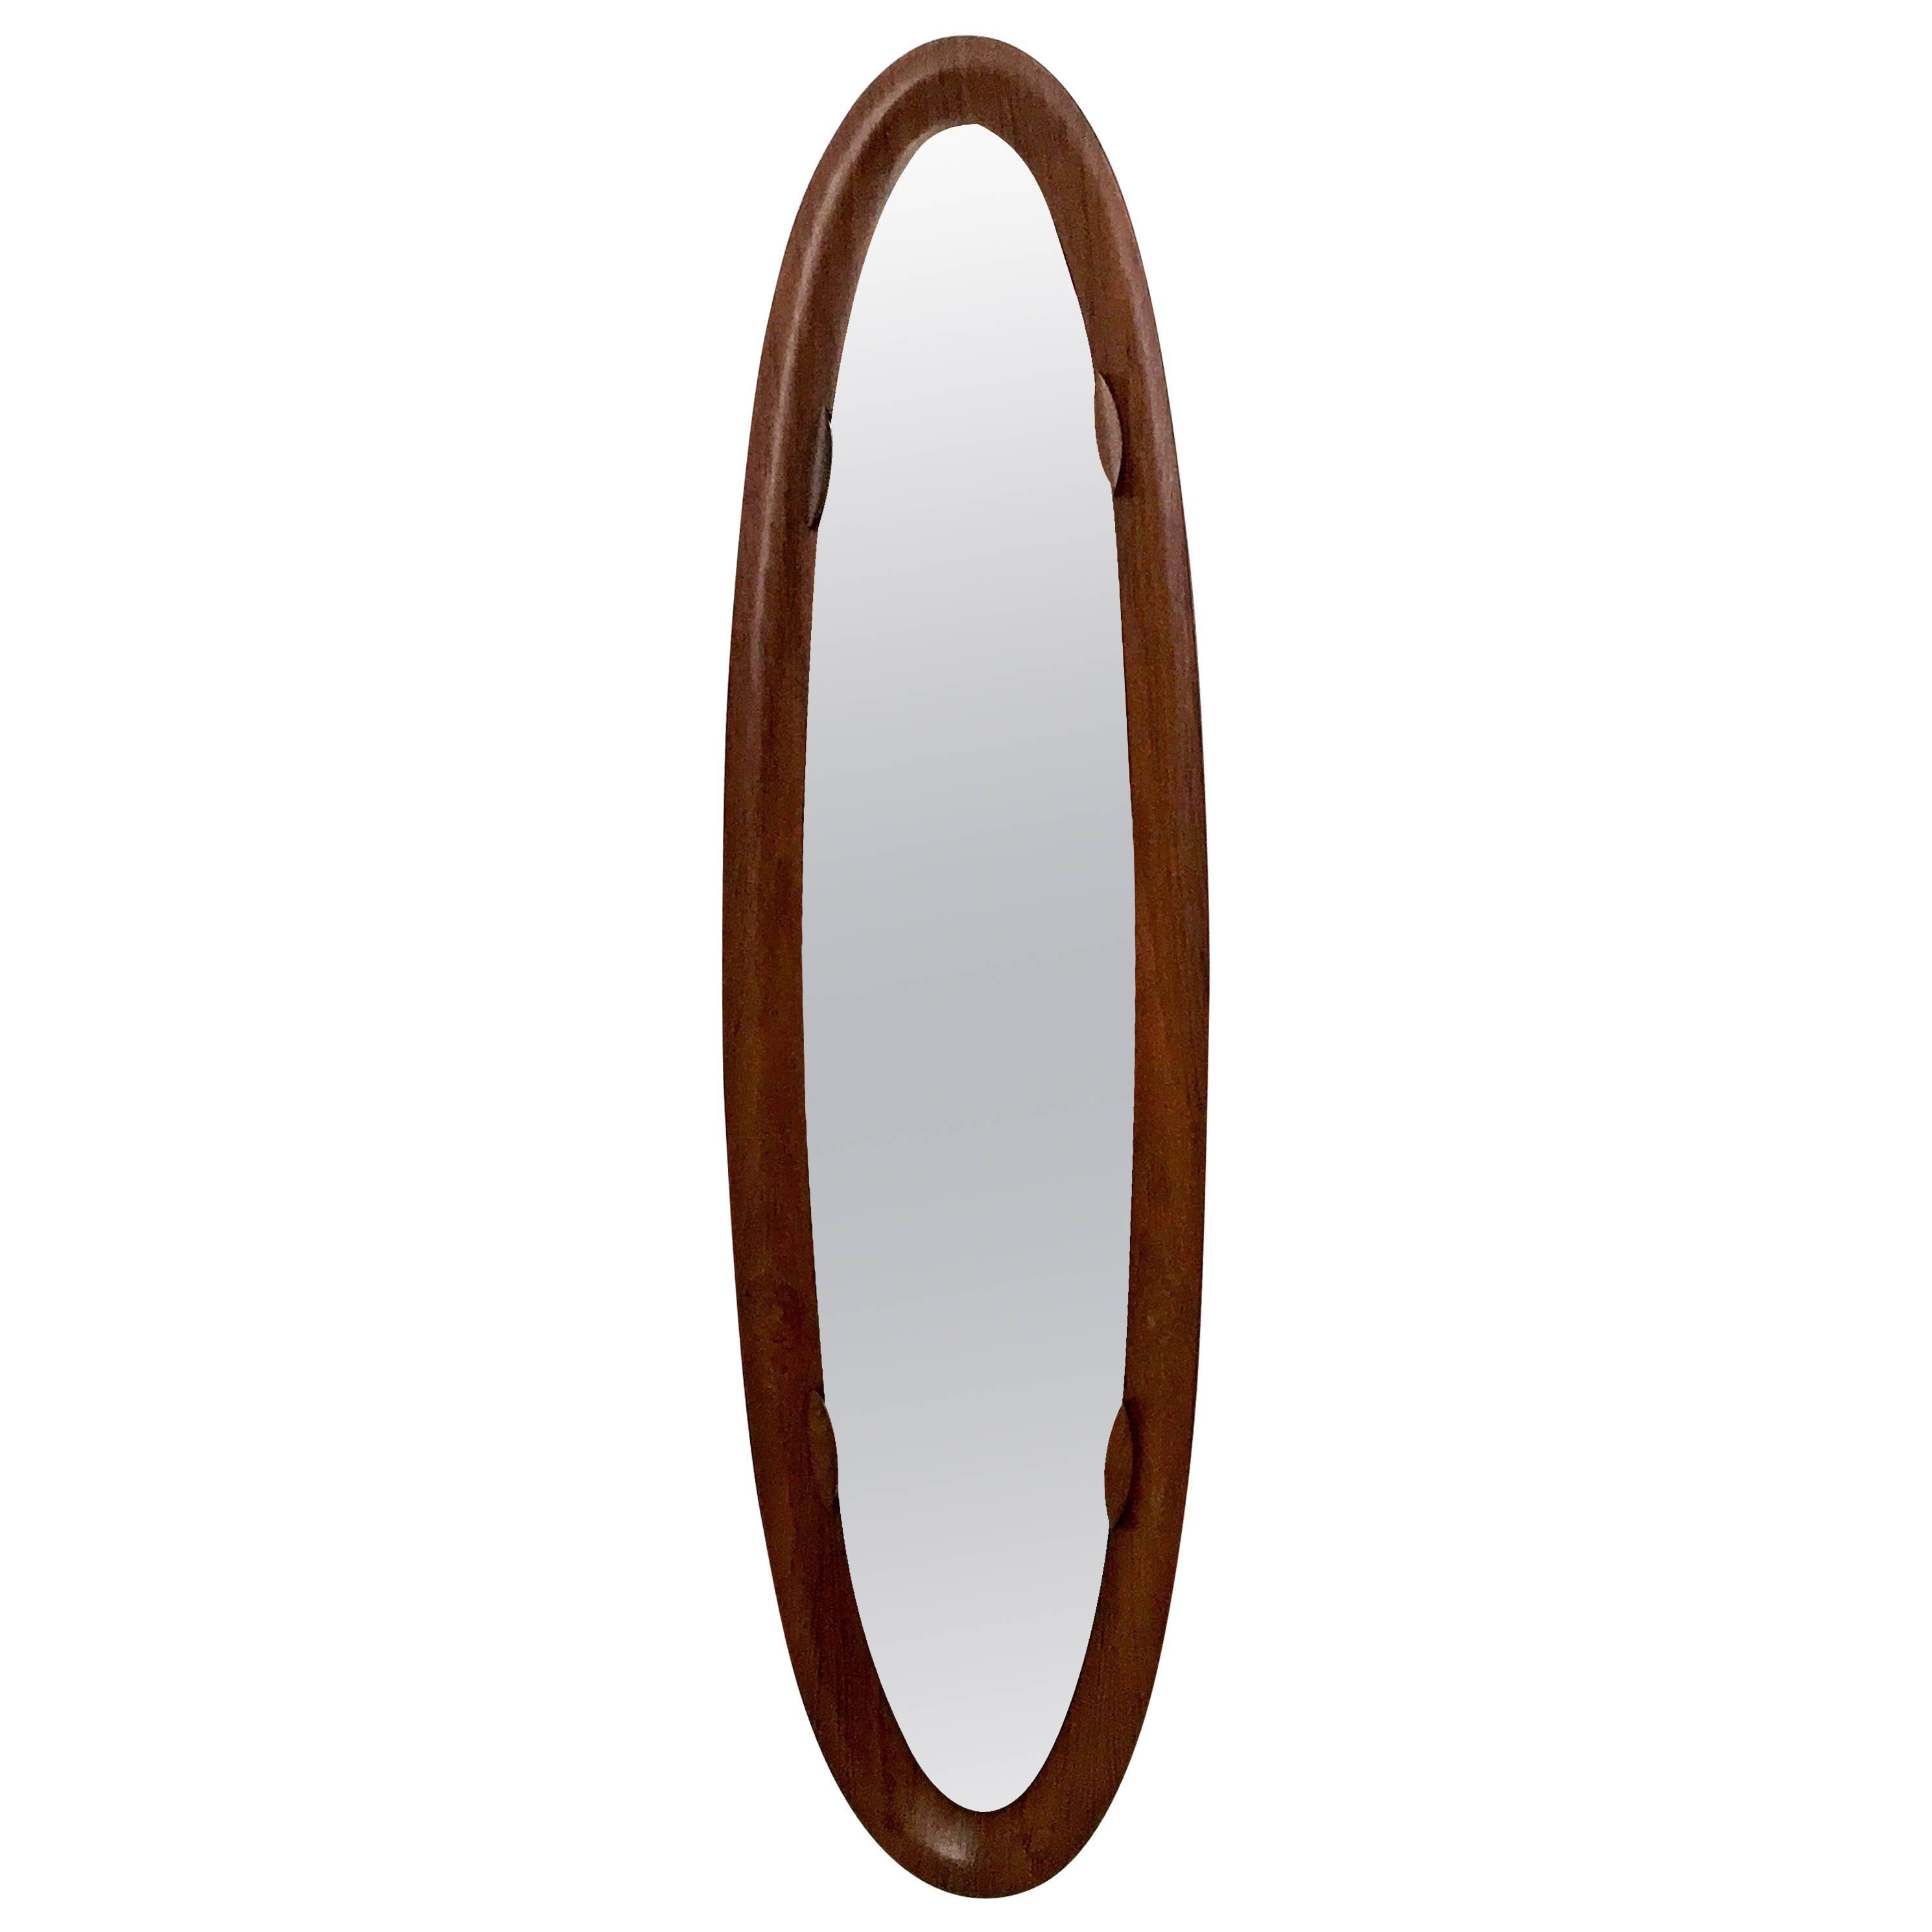 Vintage Postmodern Oval Wall Mirror with a Wooden Frame, Italy